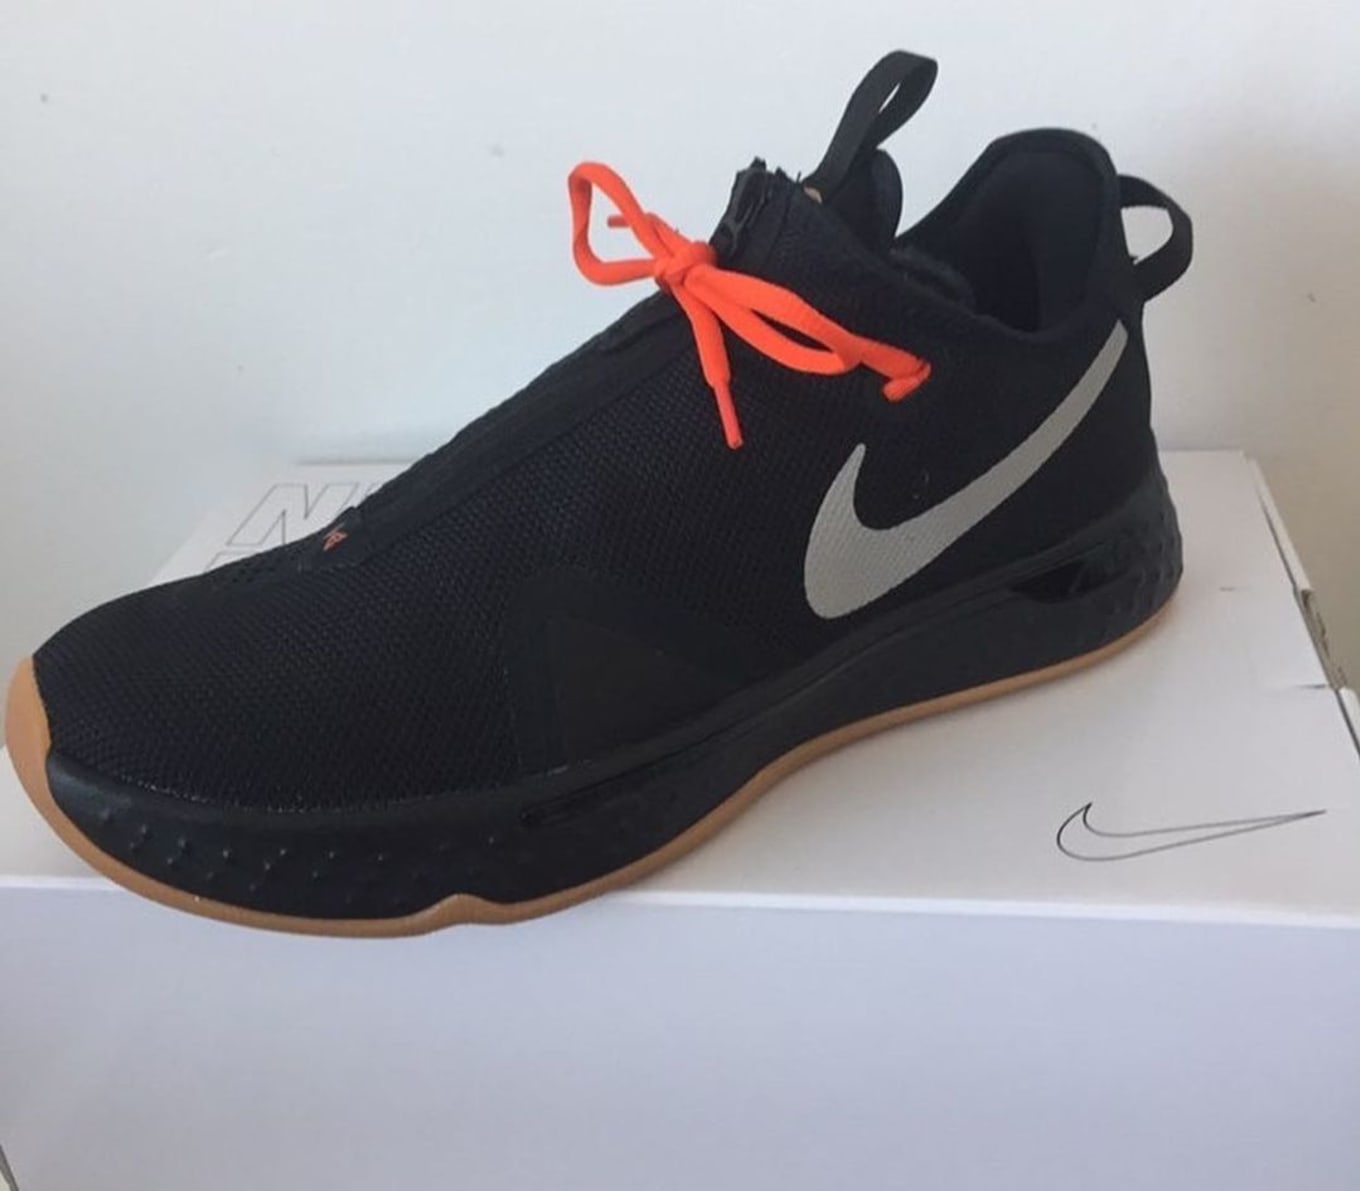 Nike By You iD PG 4 Designs | Sole Collector